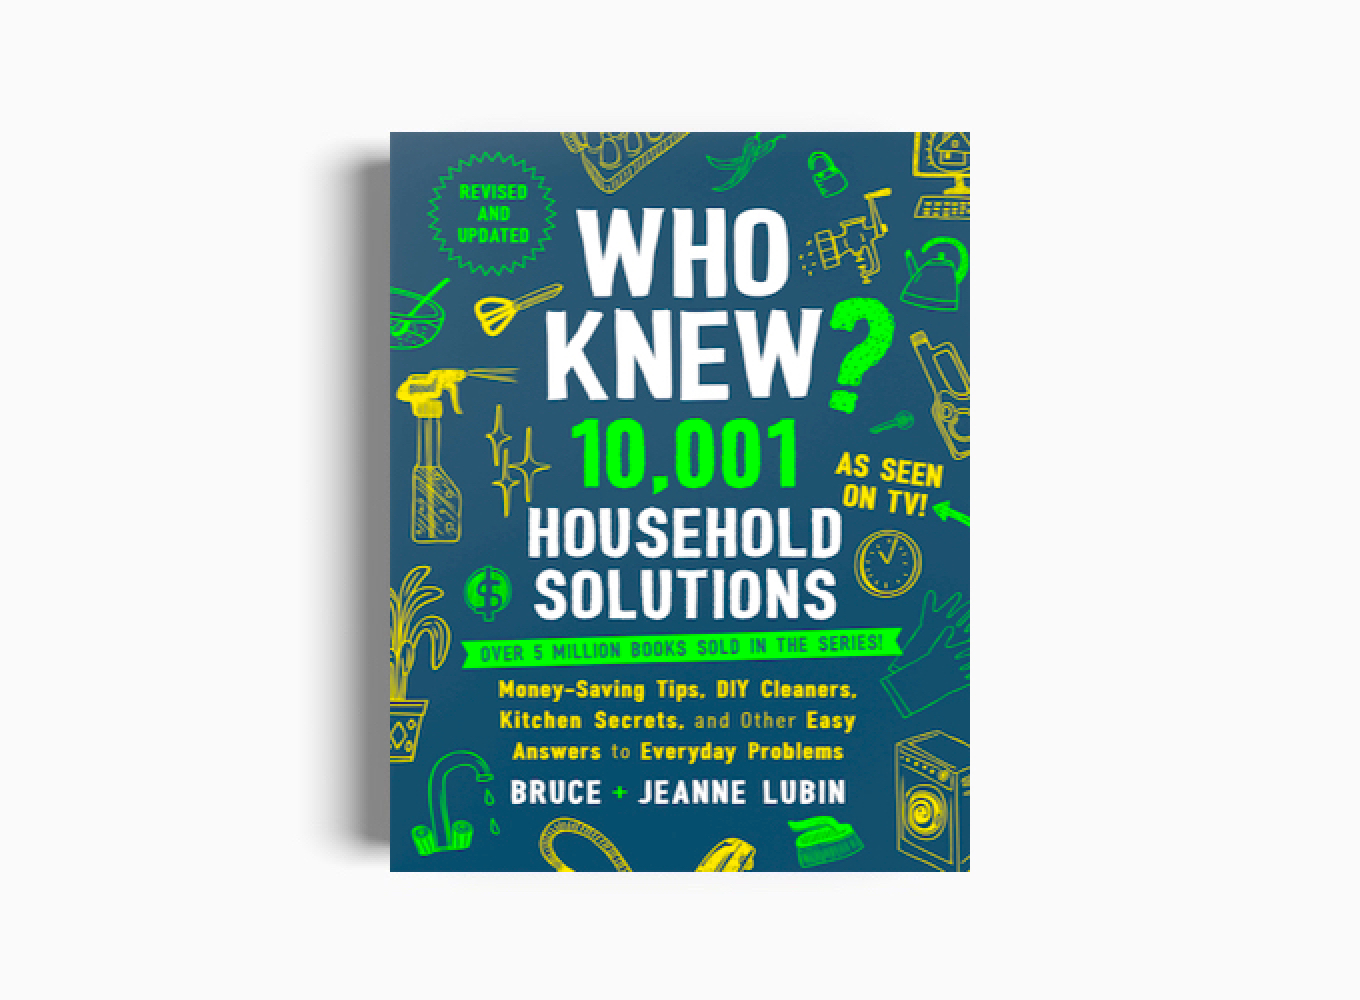 10,001 HOUSEHOLD SOLUTIONS